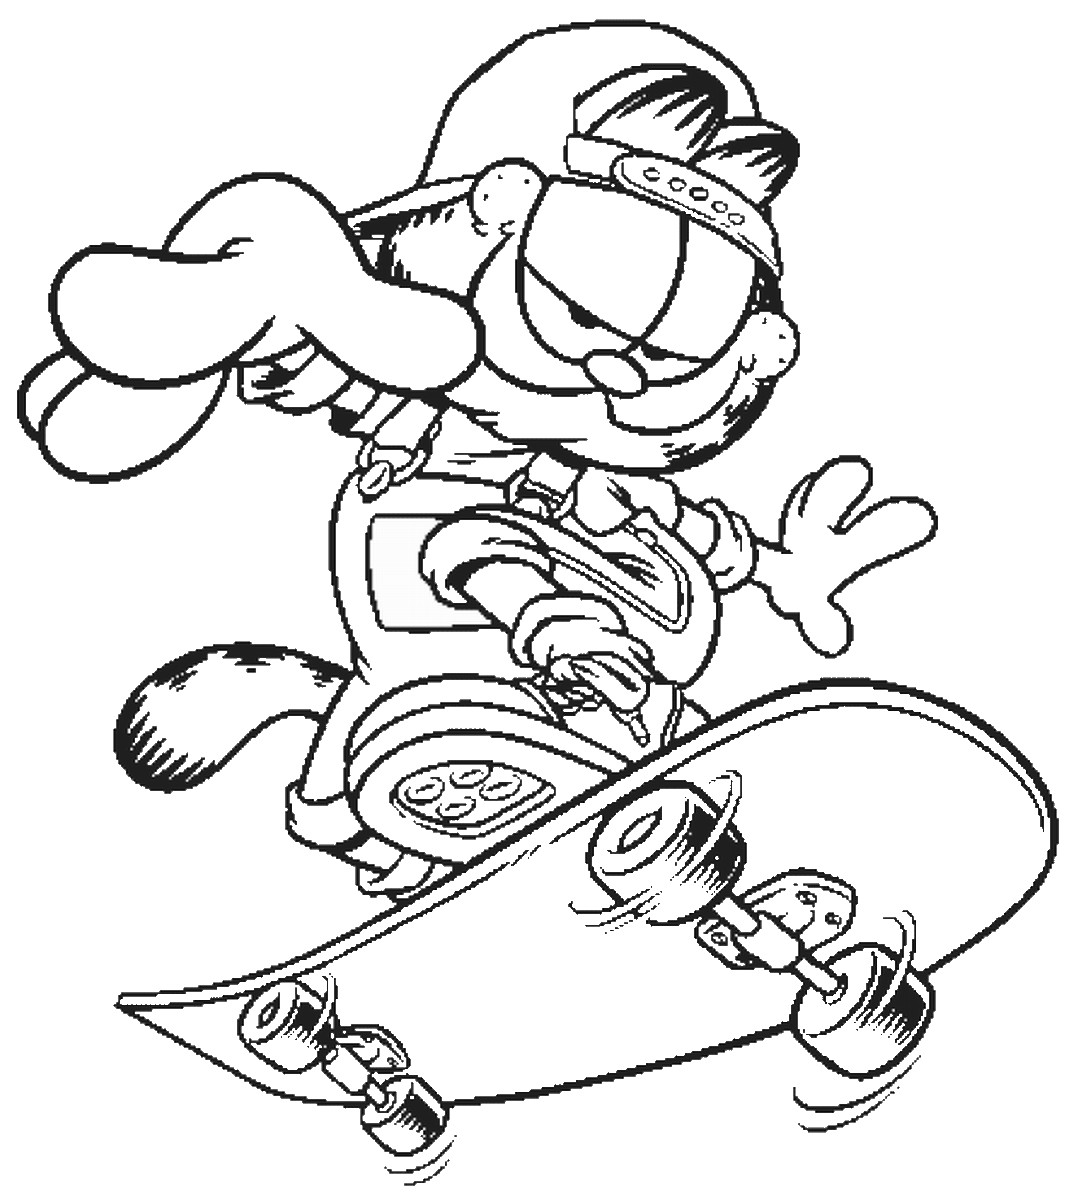 Coloring_Pages
 Garfield Coloring Pages